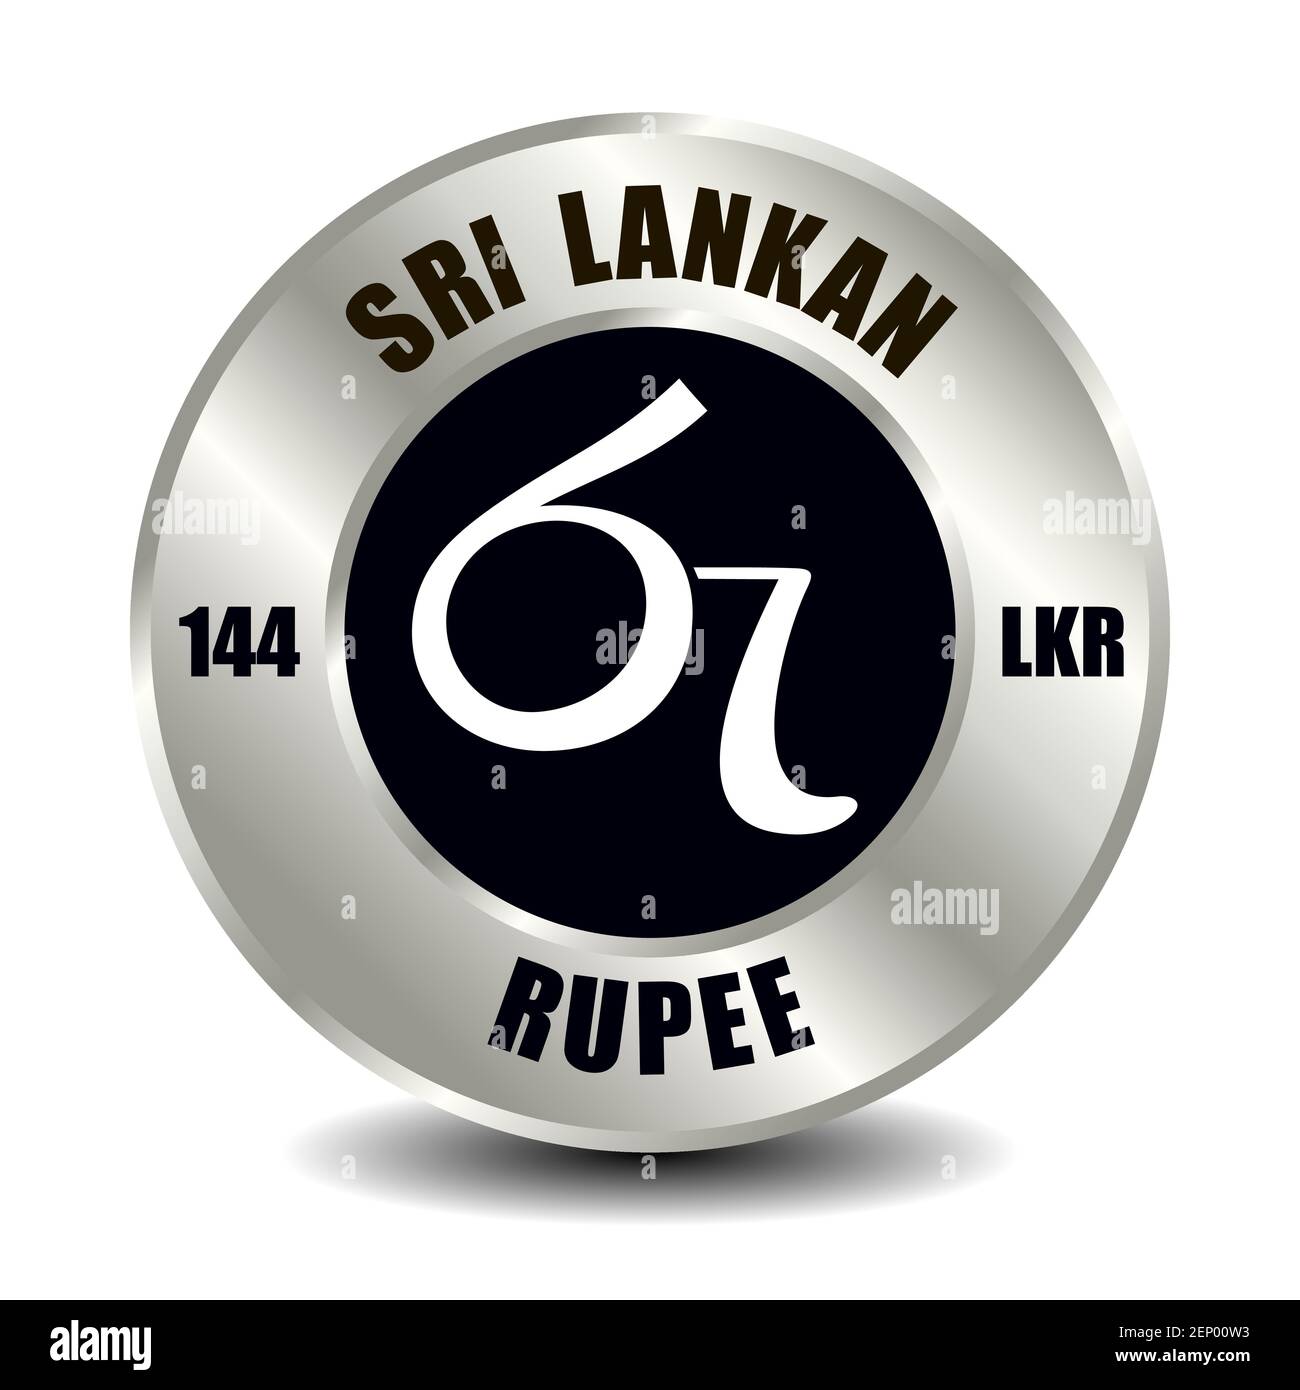 Ceylon, Sri Lanka money icon isolated on round silver coin. Vector sign of currency symbol with international ISO code and abbreviation Stock Vector